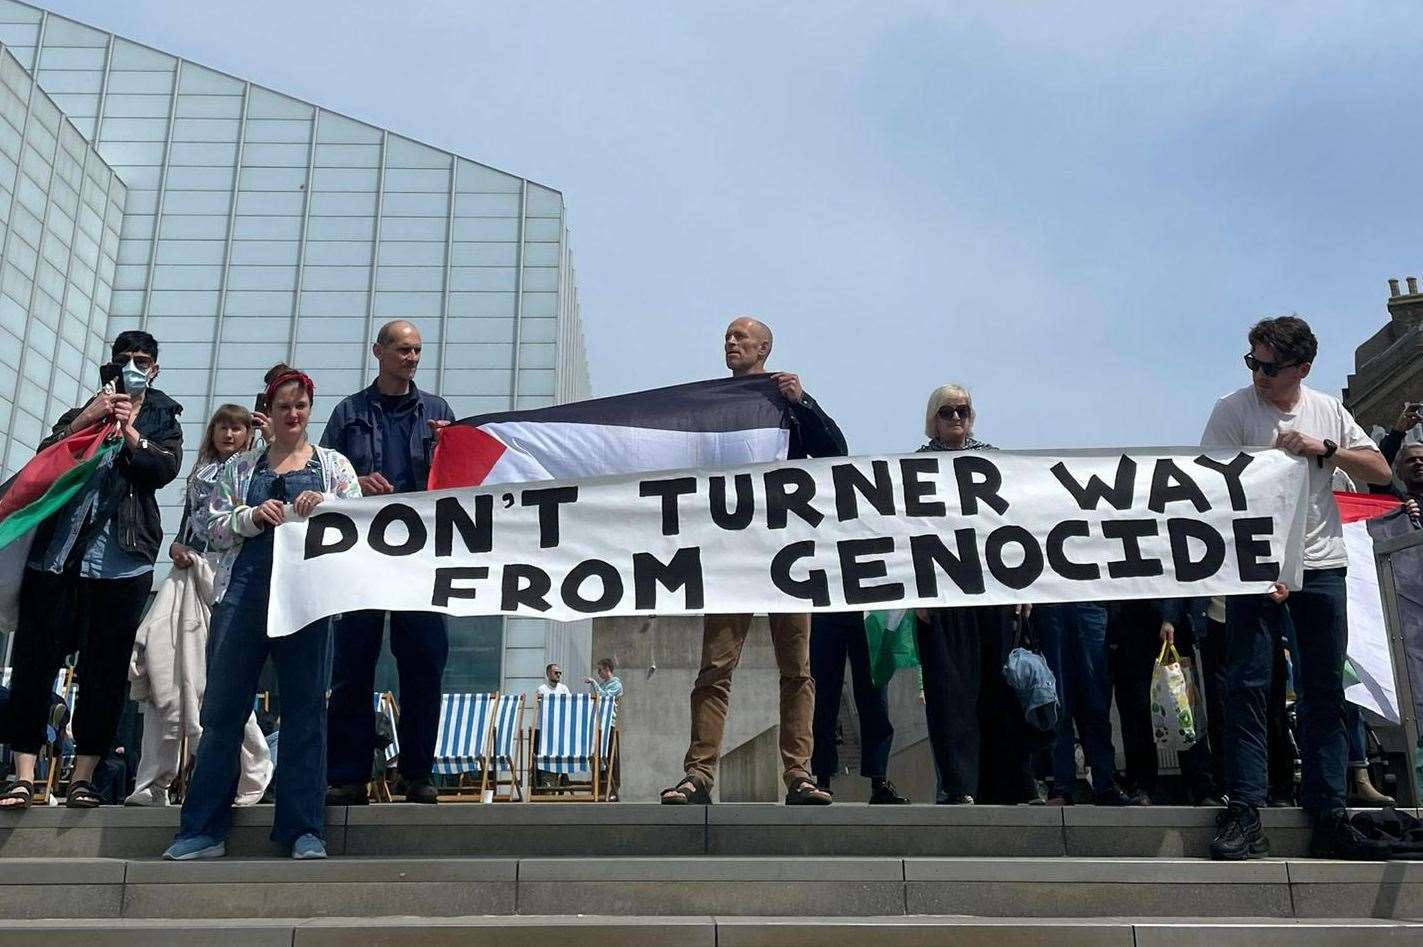 Protestors gathered on the steps outside the Turner Contemporary in Margate. Picture: Thanet4Palestine